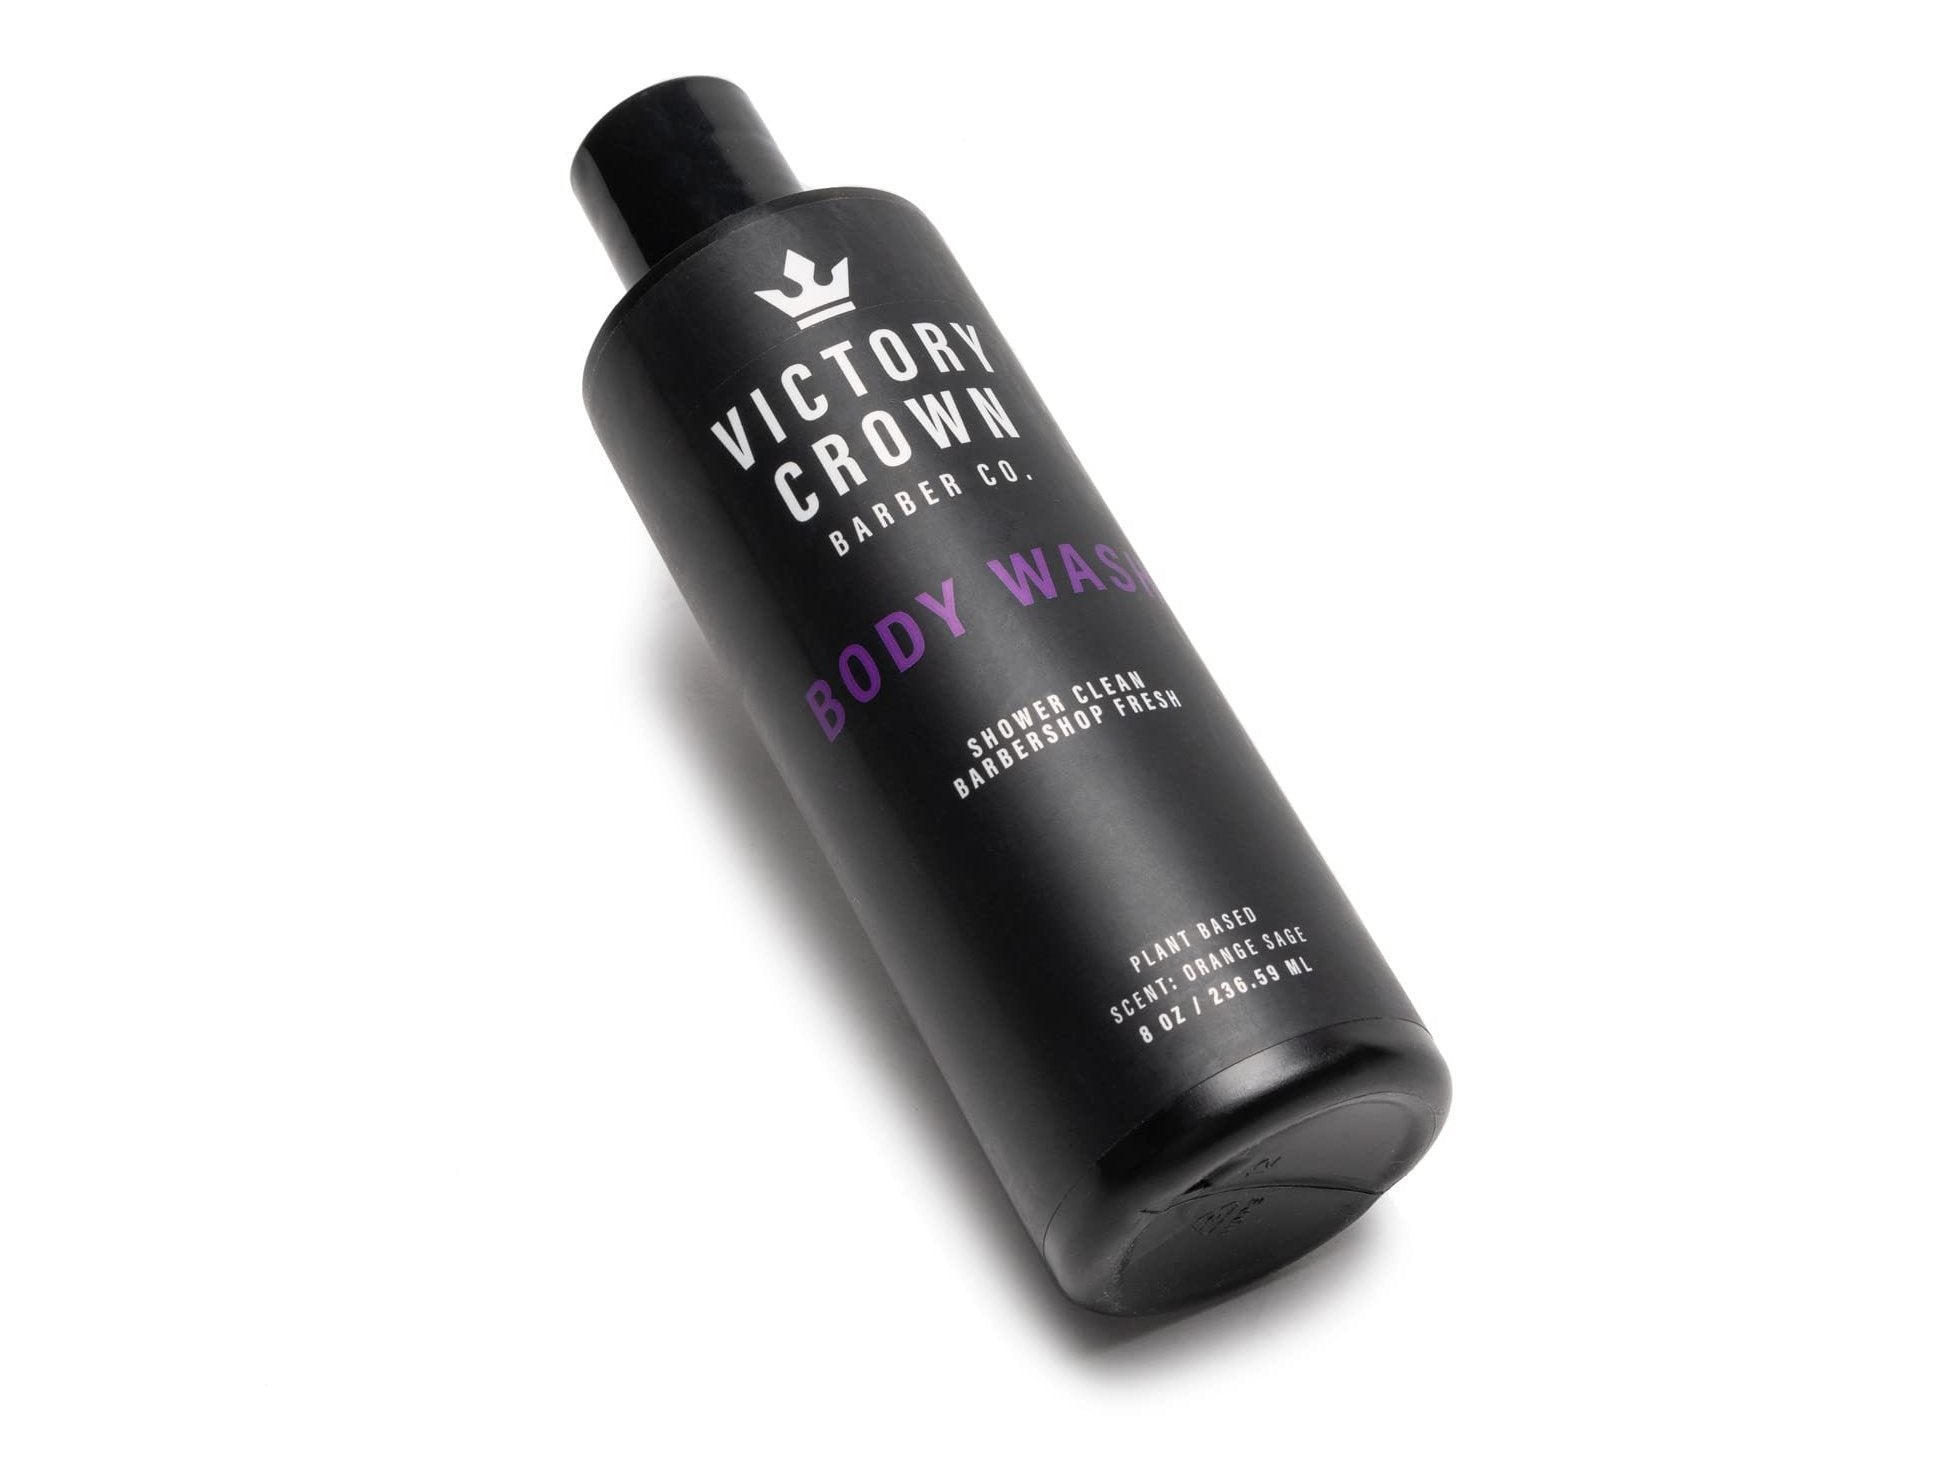 Load image into Gallery viewer, Victory Crown Body Wash, 8 oz.
